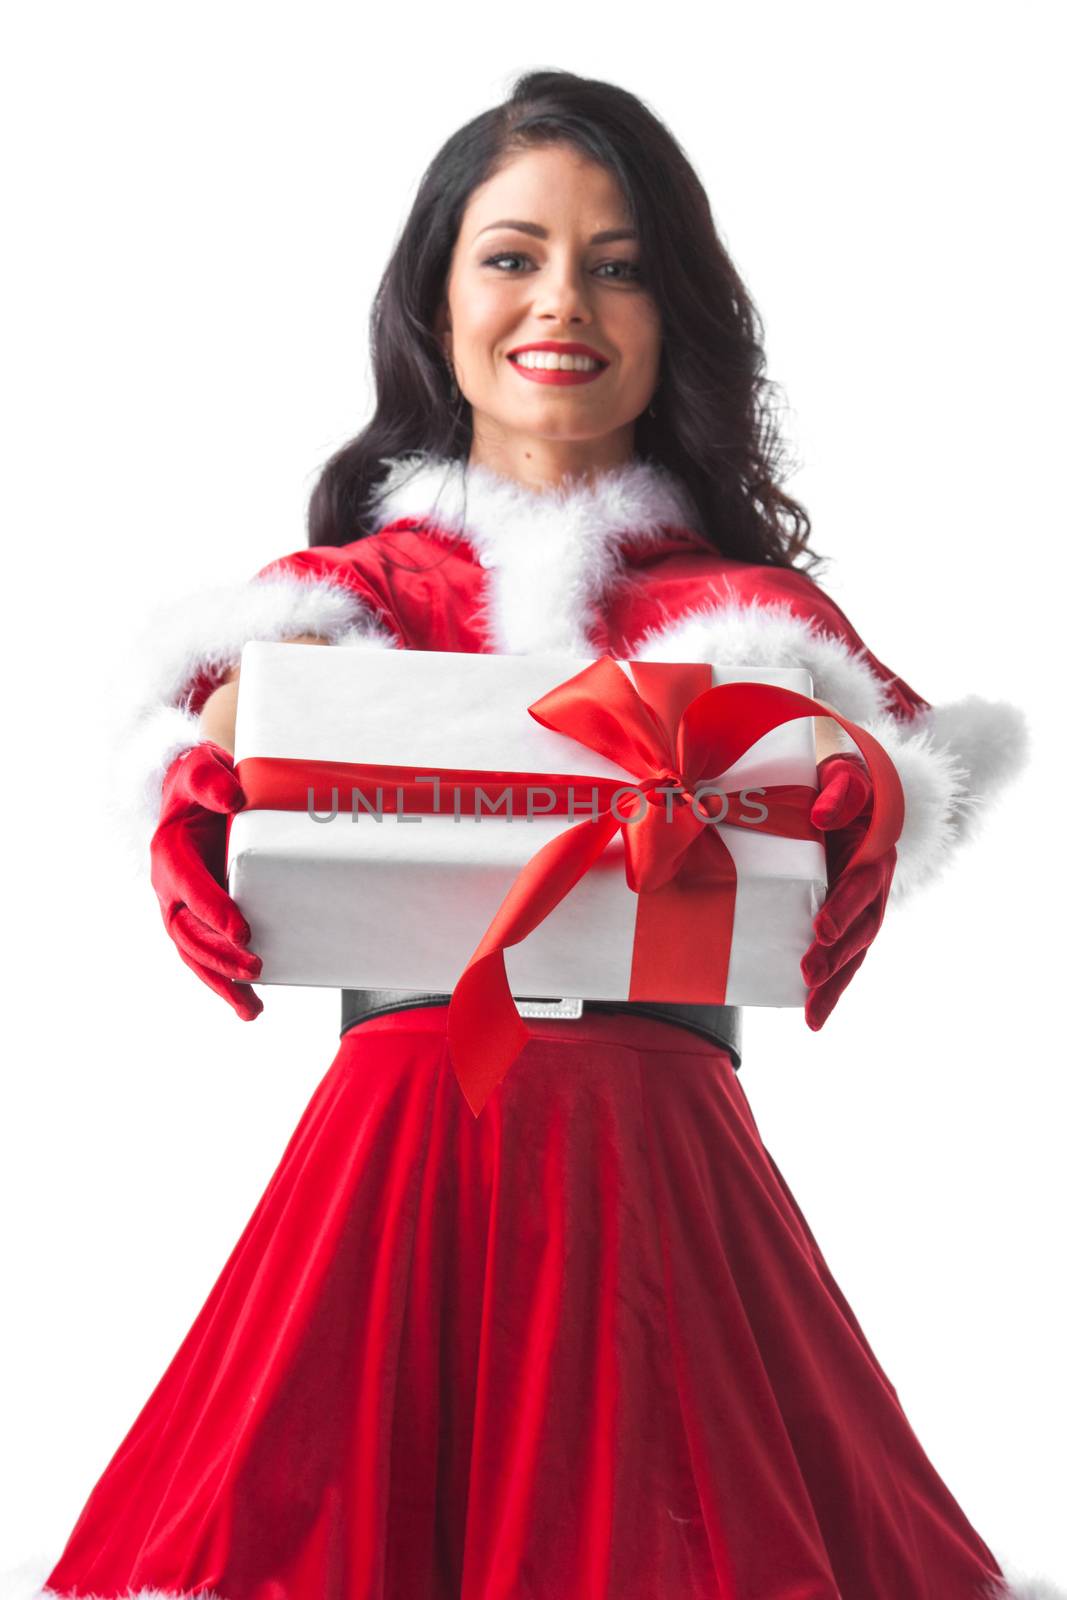 Beautiful woman in Santa Claus style dress with gift box